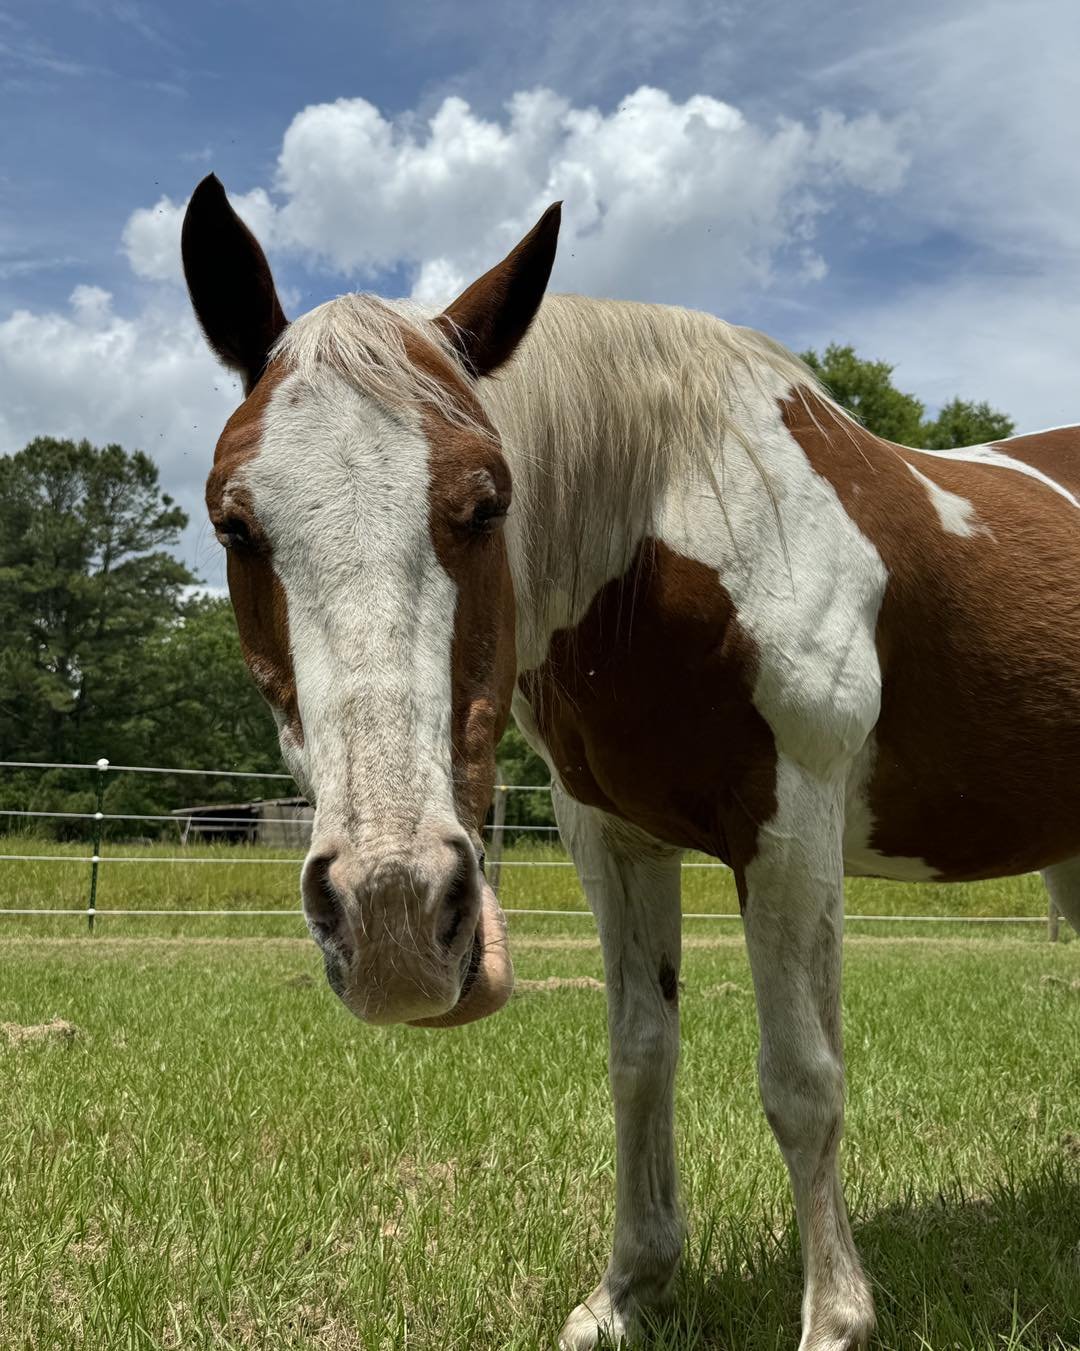 We want to take a minute to welcome Banjo and Riley to Blue Sky Acres! After 3 years in existence and 1 year at this property, we are so excited to finally have horses onsite. They are now in their evaluation period and are getting settled in. We are